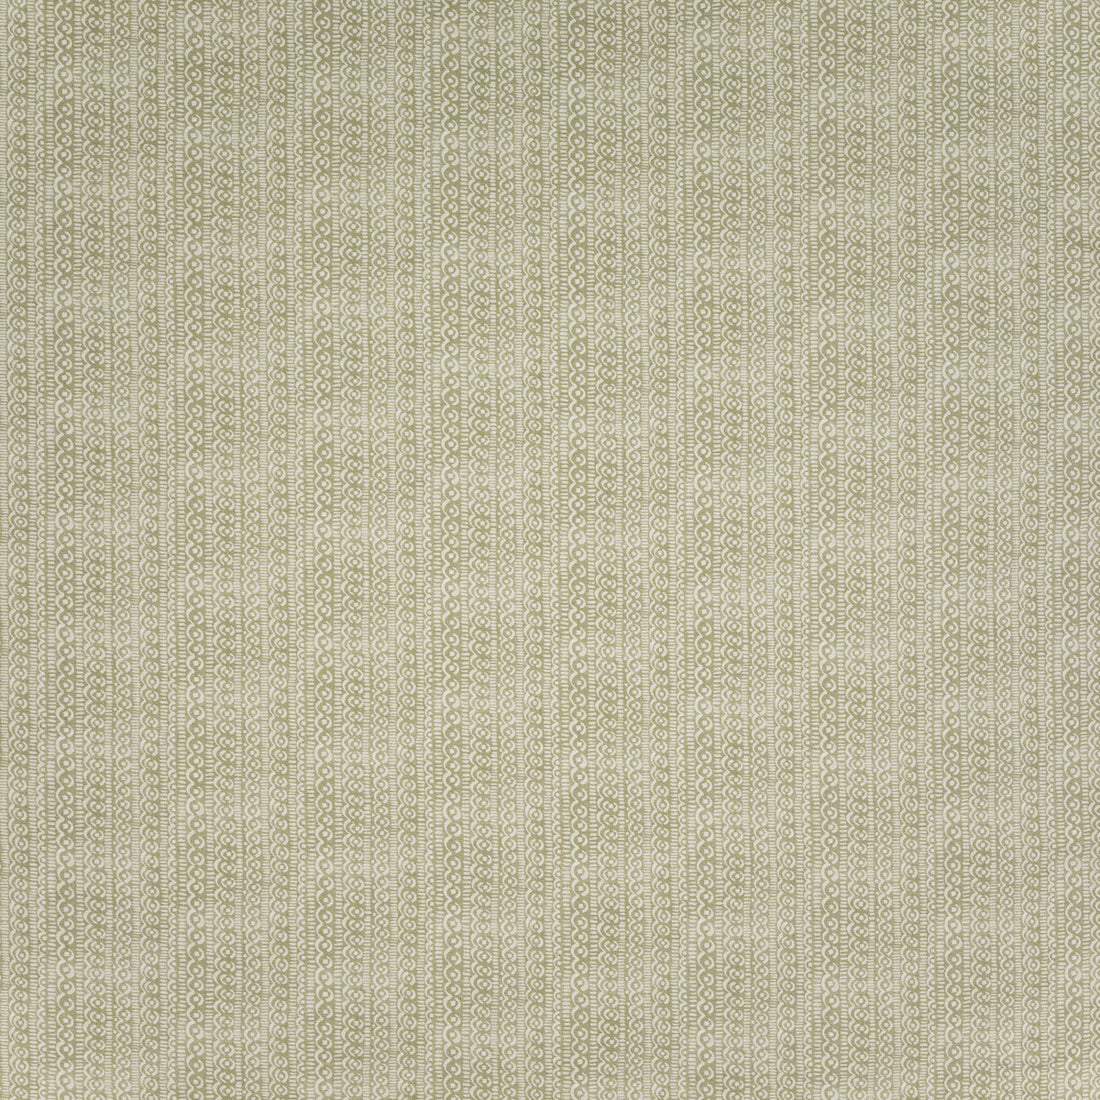 Portland fabric in olive color - pattern BFC-3707.130.0 - by Lee Jofa in the Blithfield Eden collection